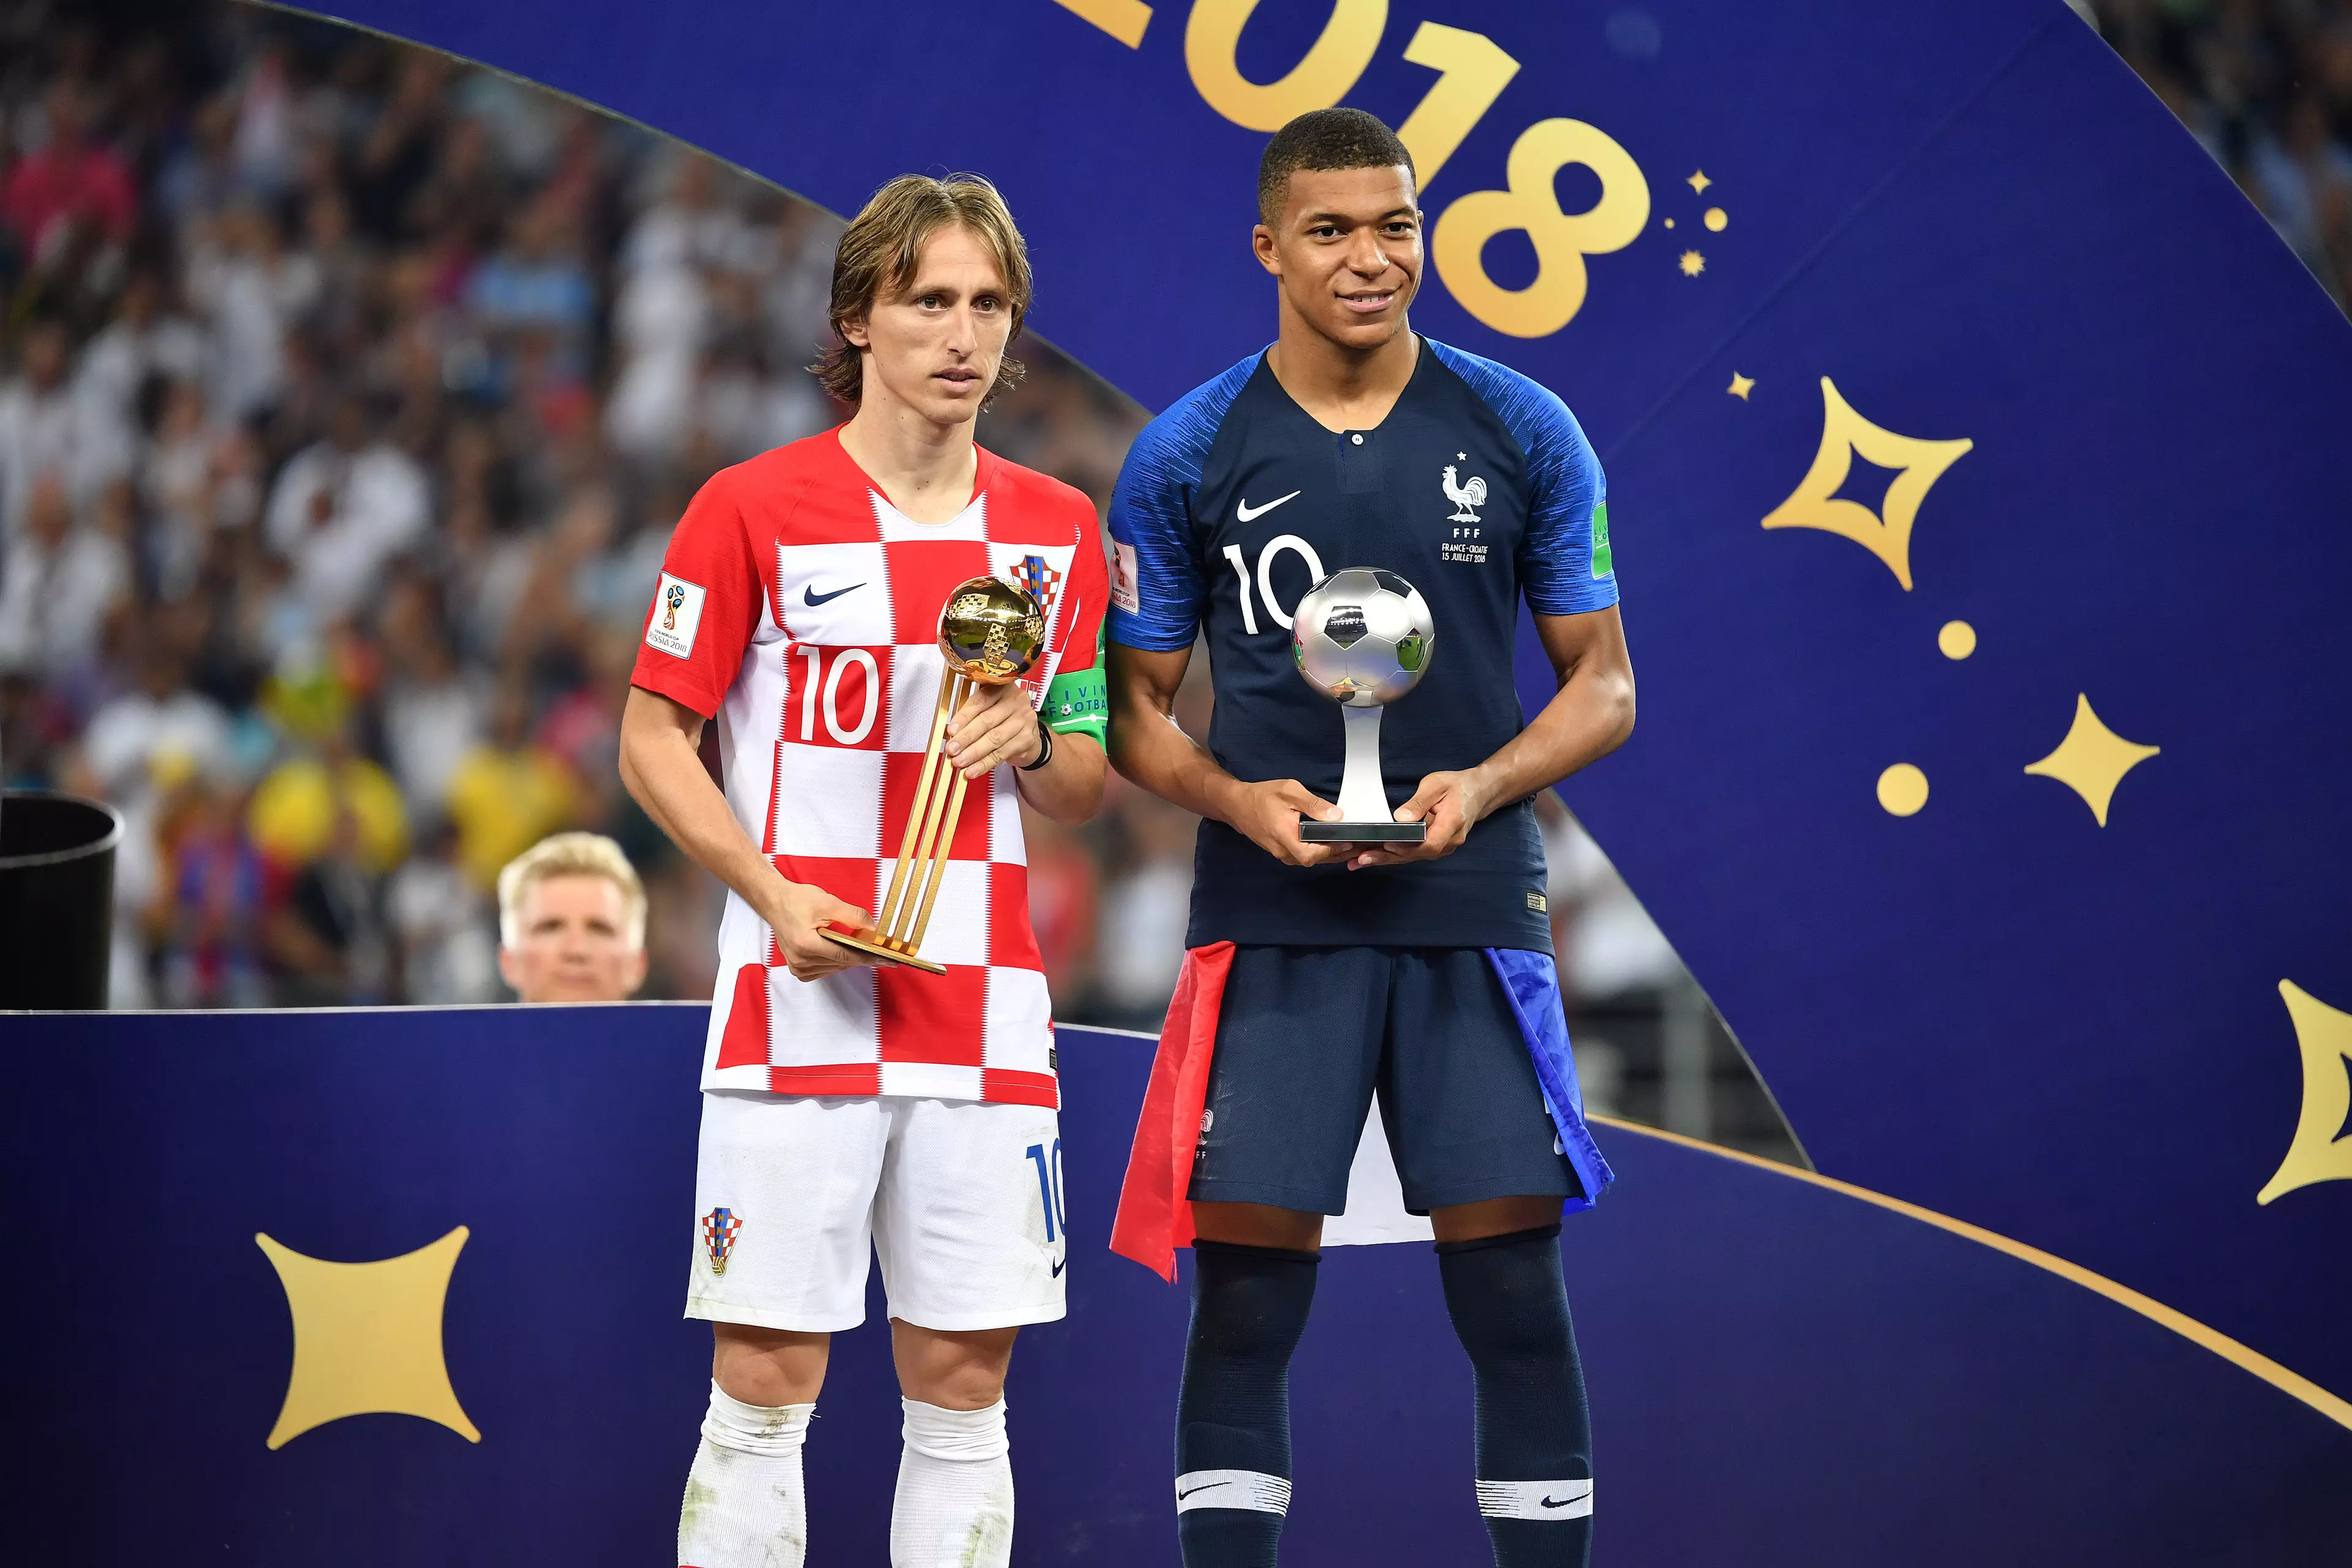 Modric won the award for the best player at the World Cup. Image: PA